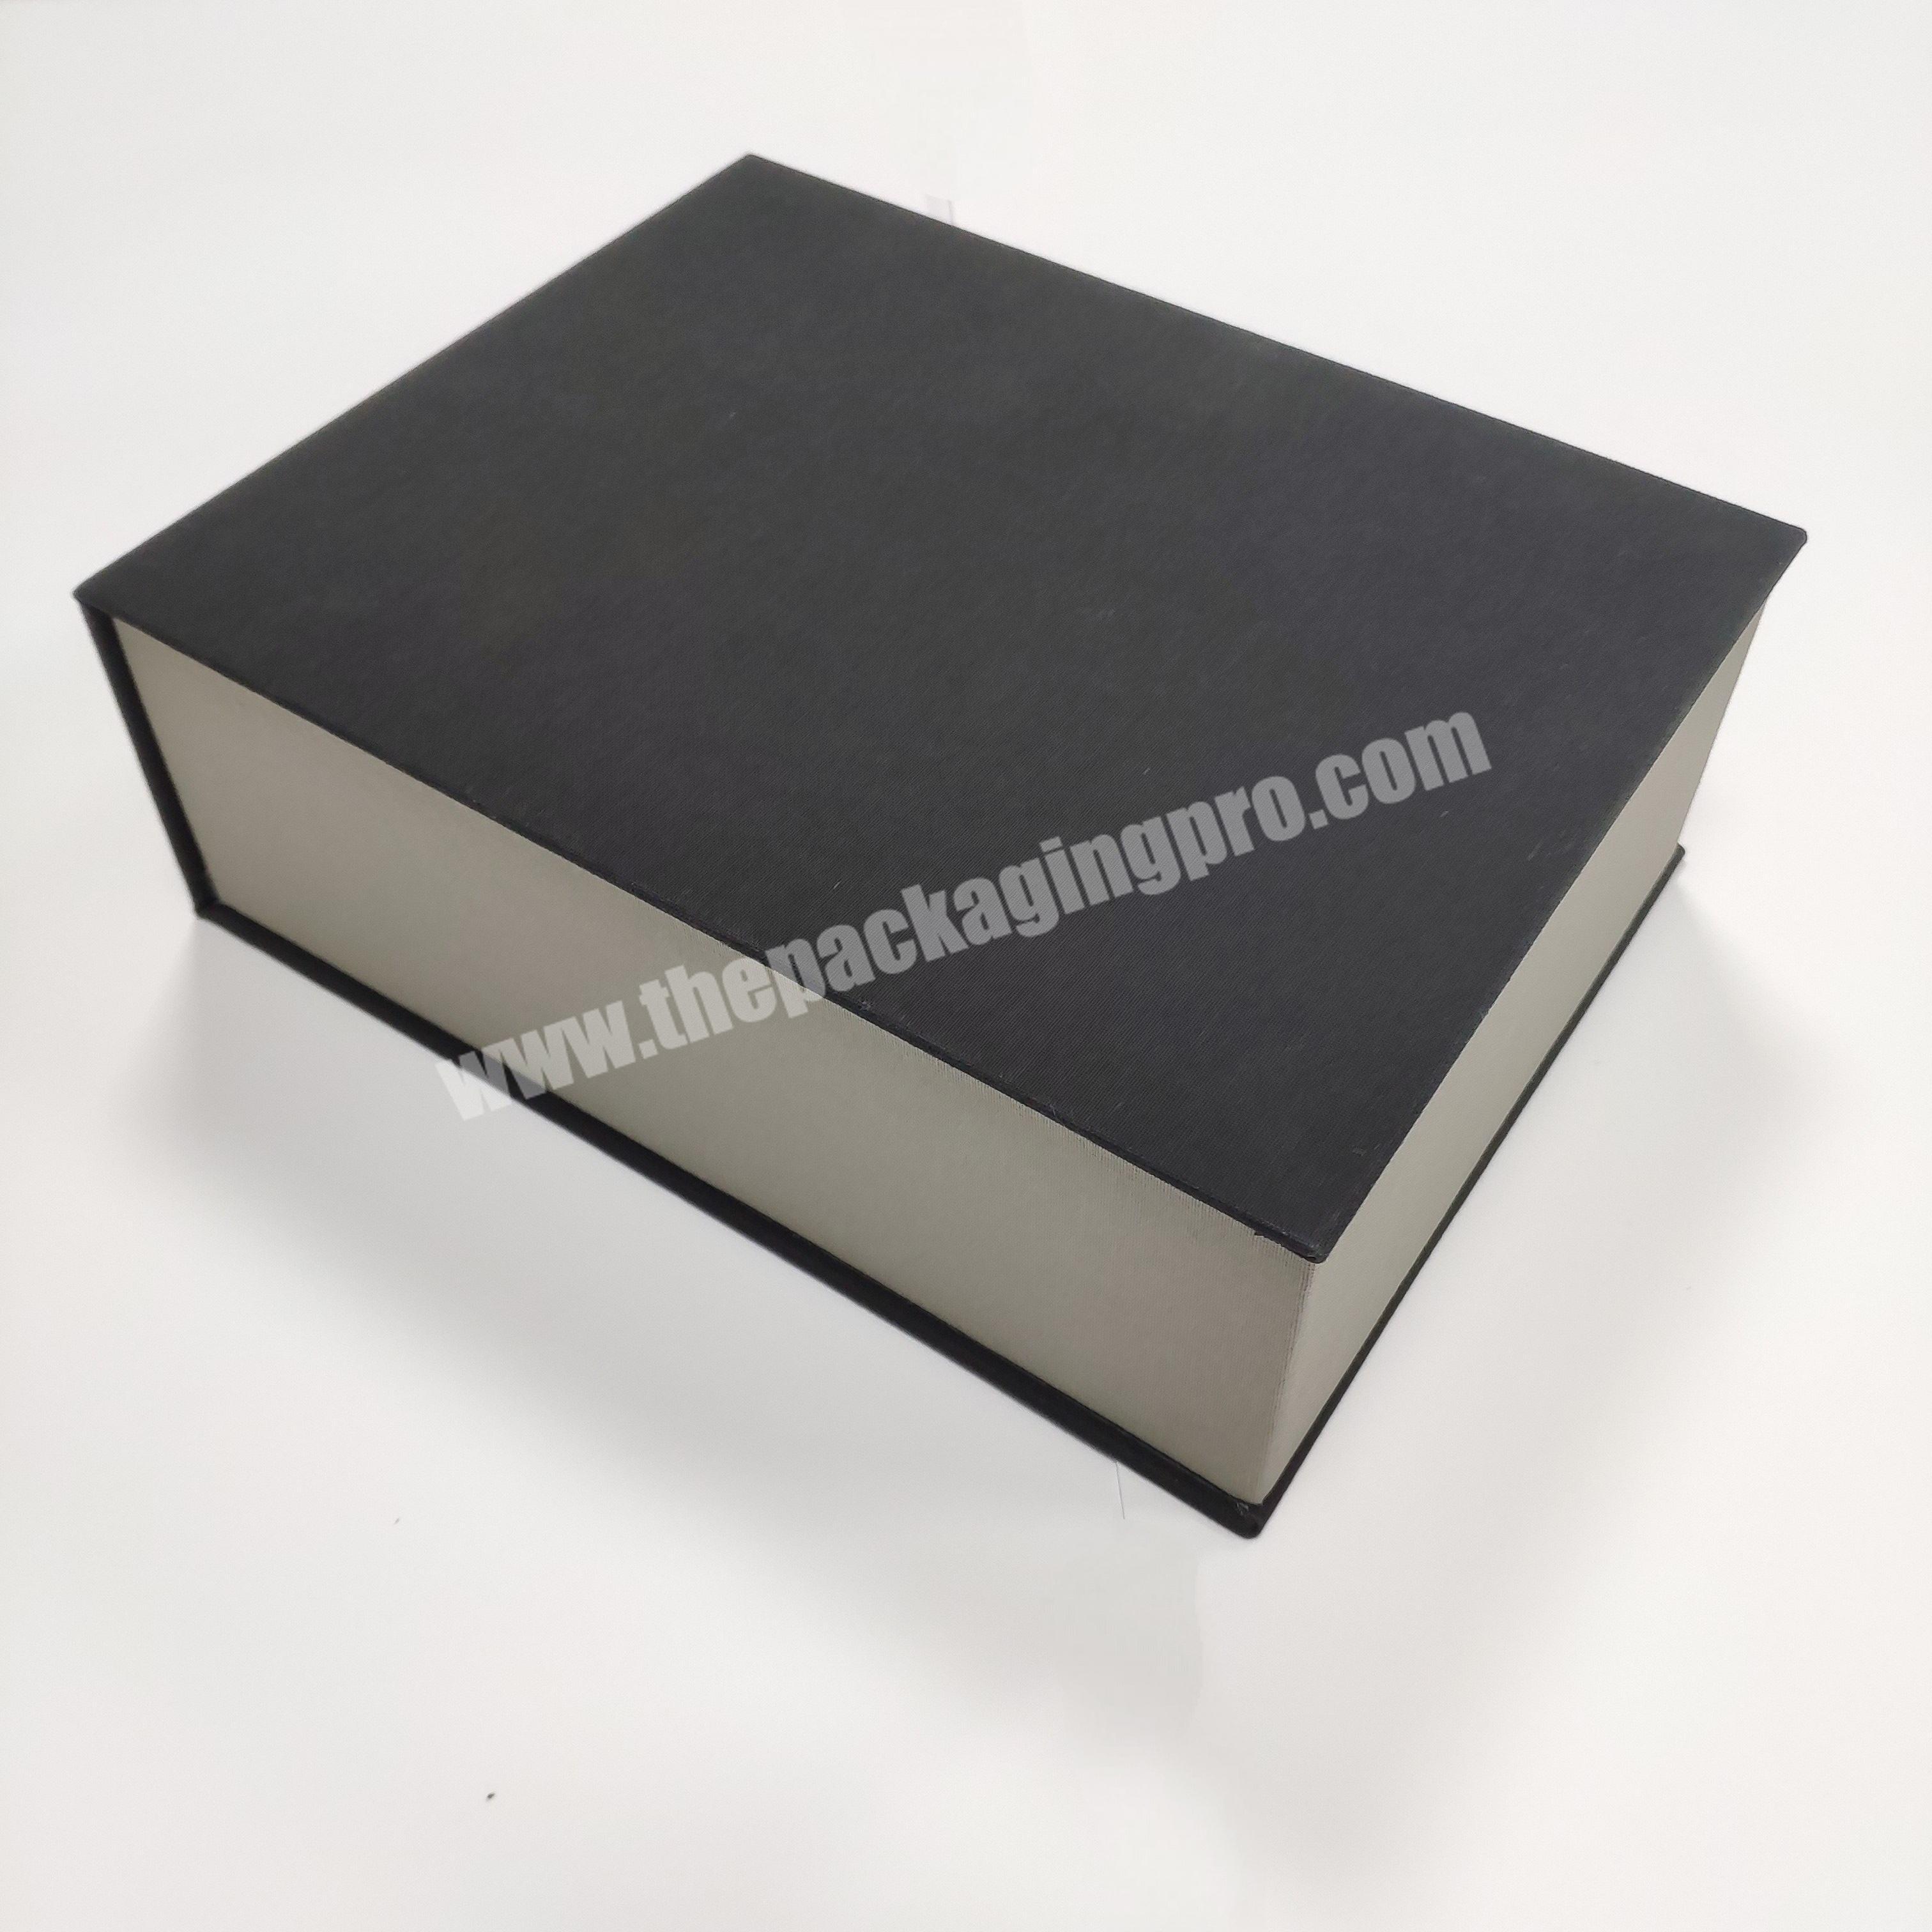 Linen Fabric Covering Book Shaped Box